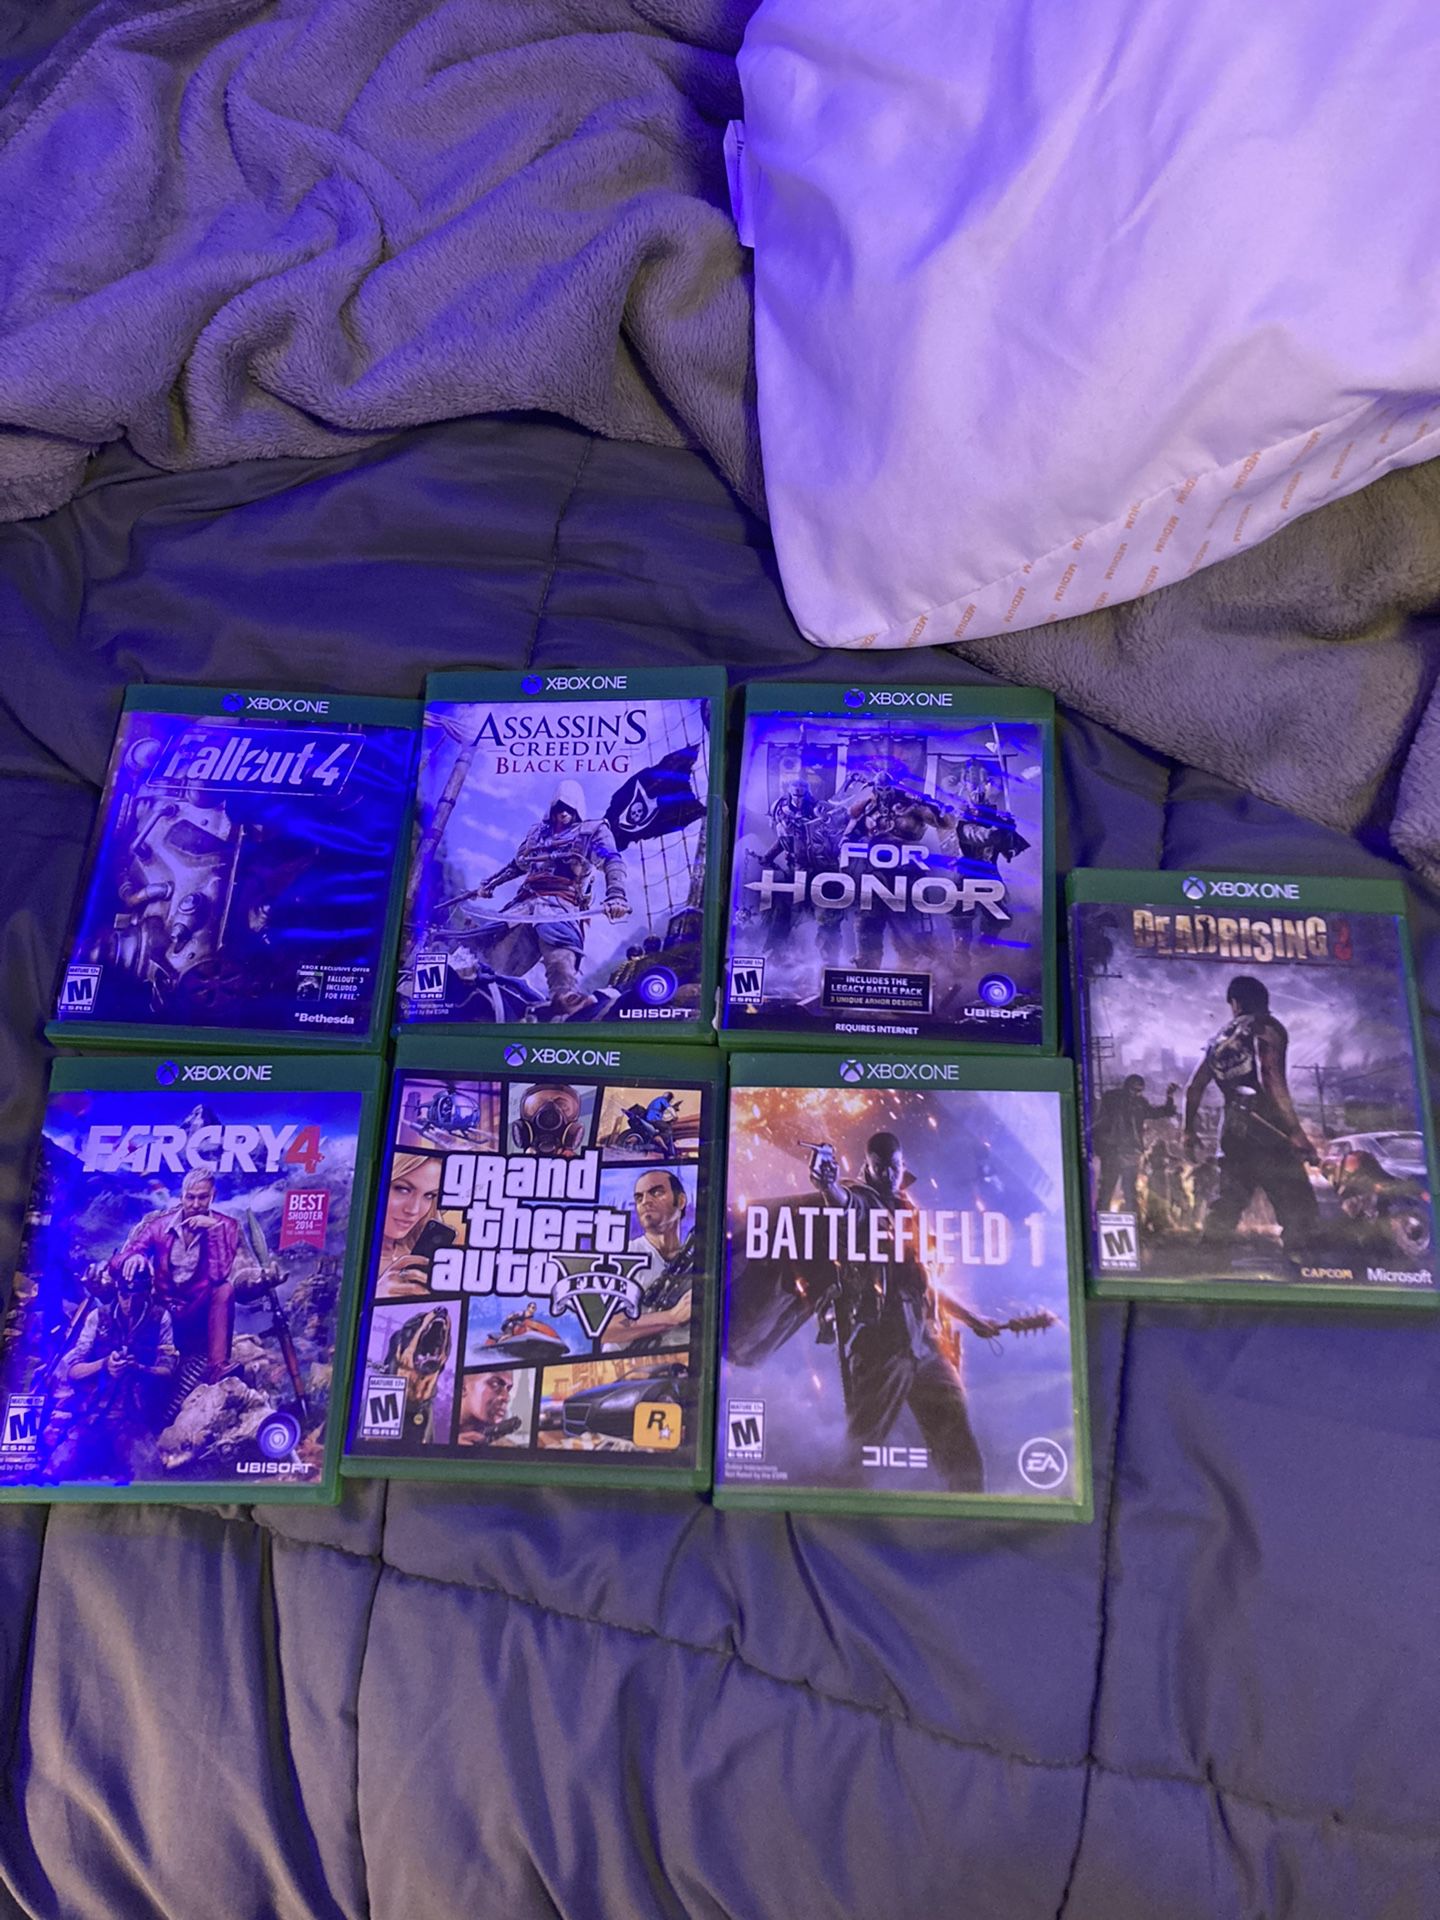 Xbox Games-Gta 5, Fallout 4, Battlefield and other game discs